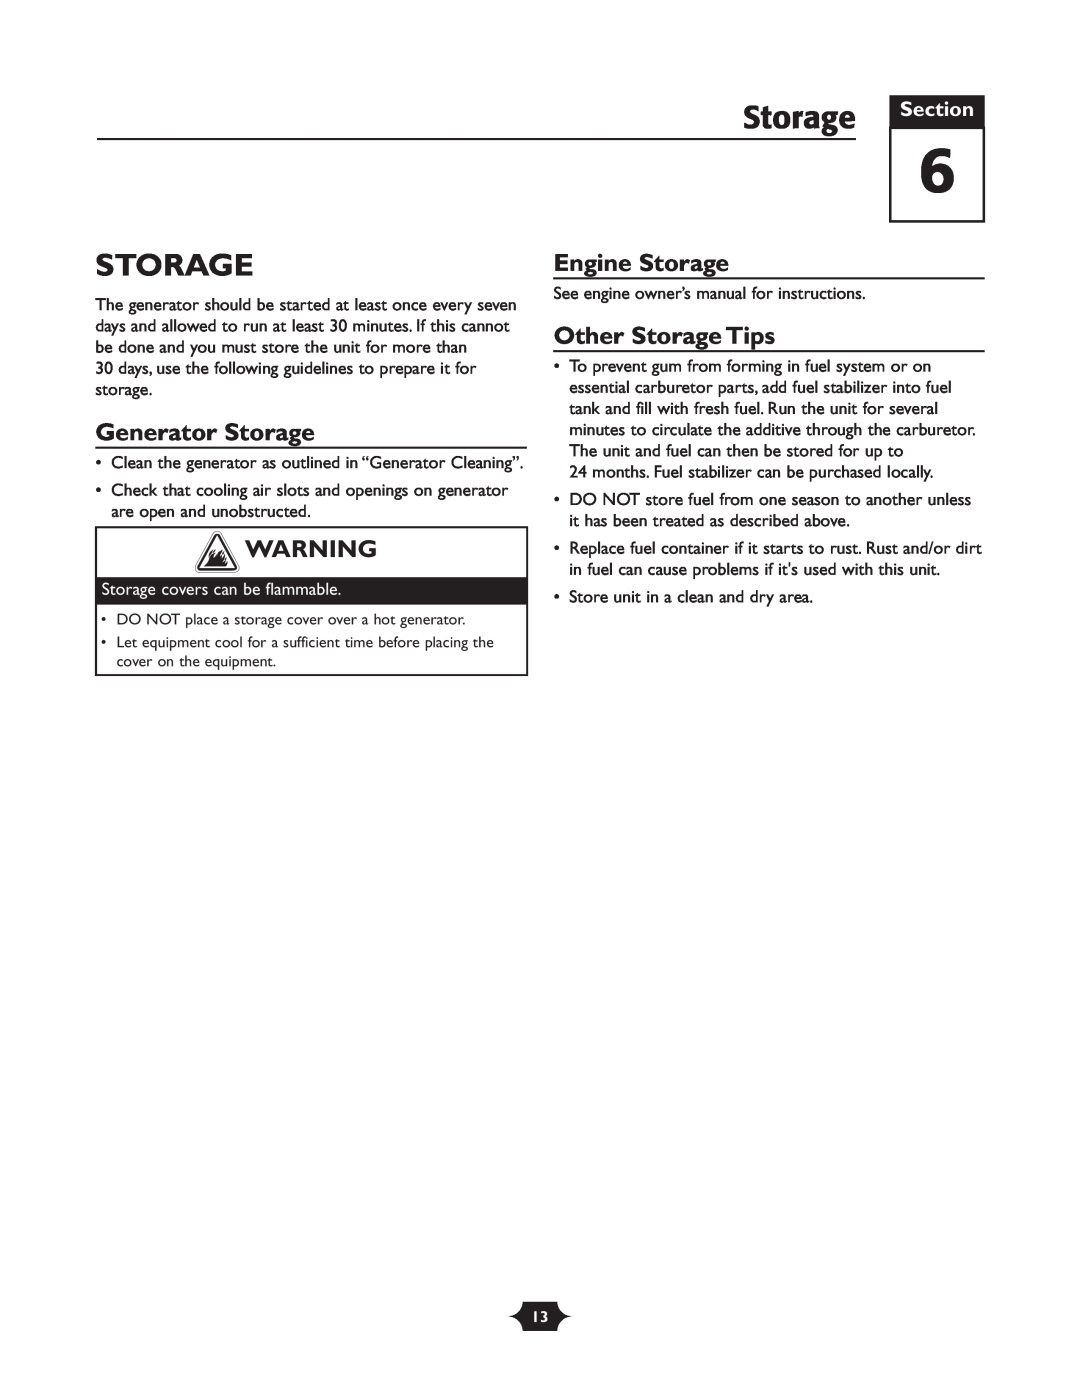 Troy-Bilt 1919 Generator Storage, Engine Storage, Other Storage Tips, Storage covers can be flammable, Section 